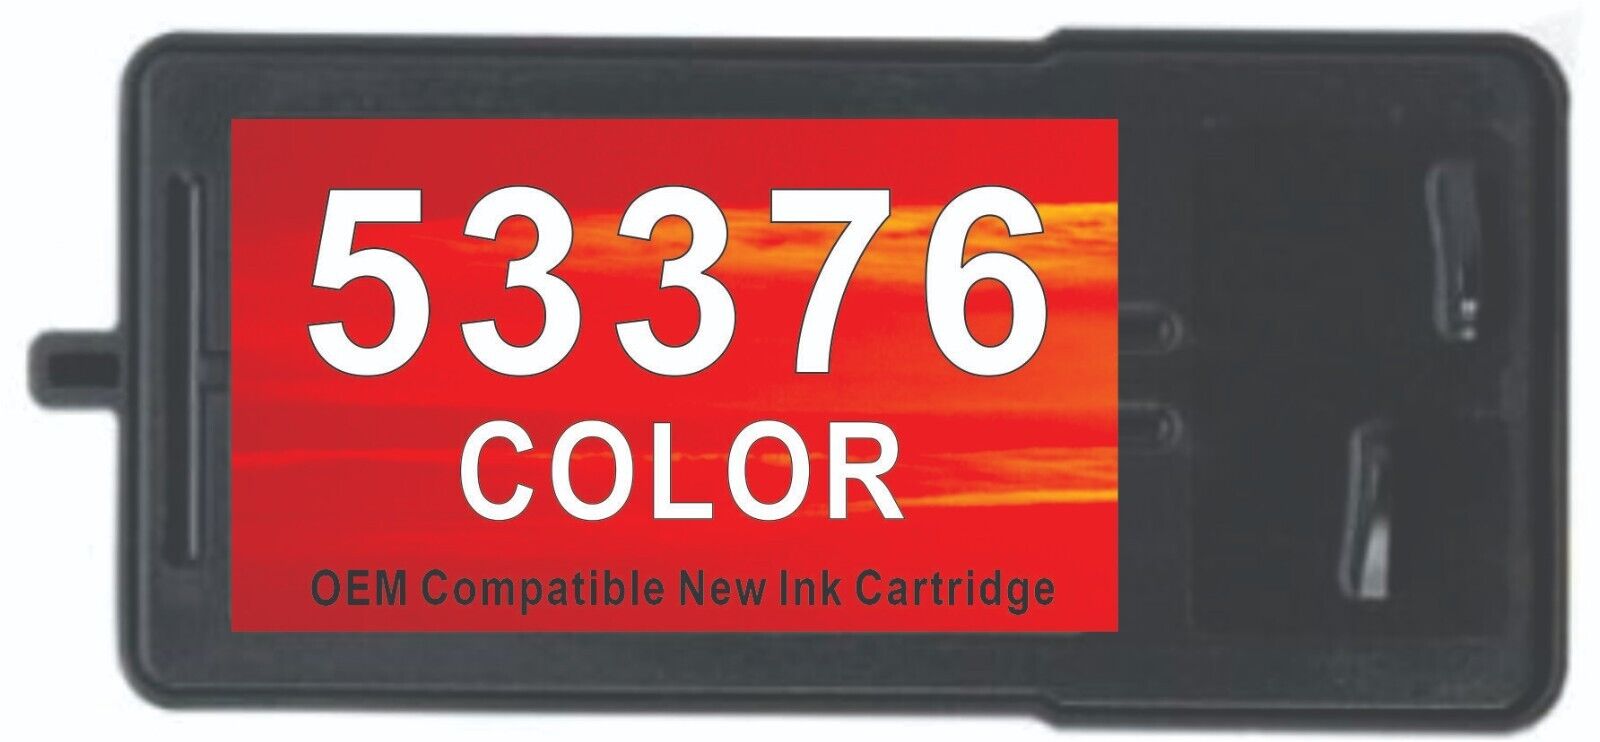 Primera Color 53376 Ink Cartridge for LX400, PX450, LX800 and LX810 